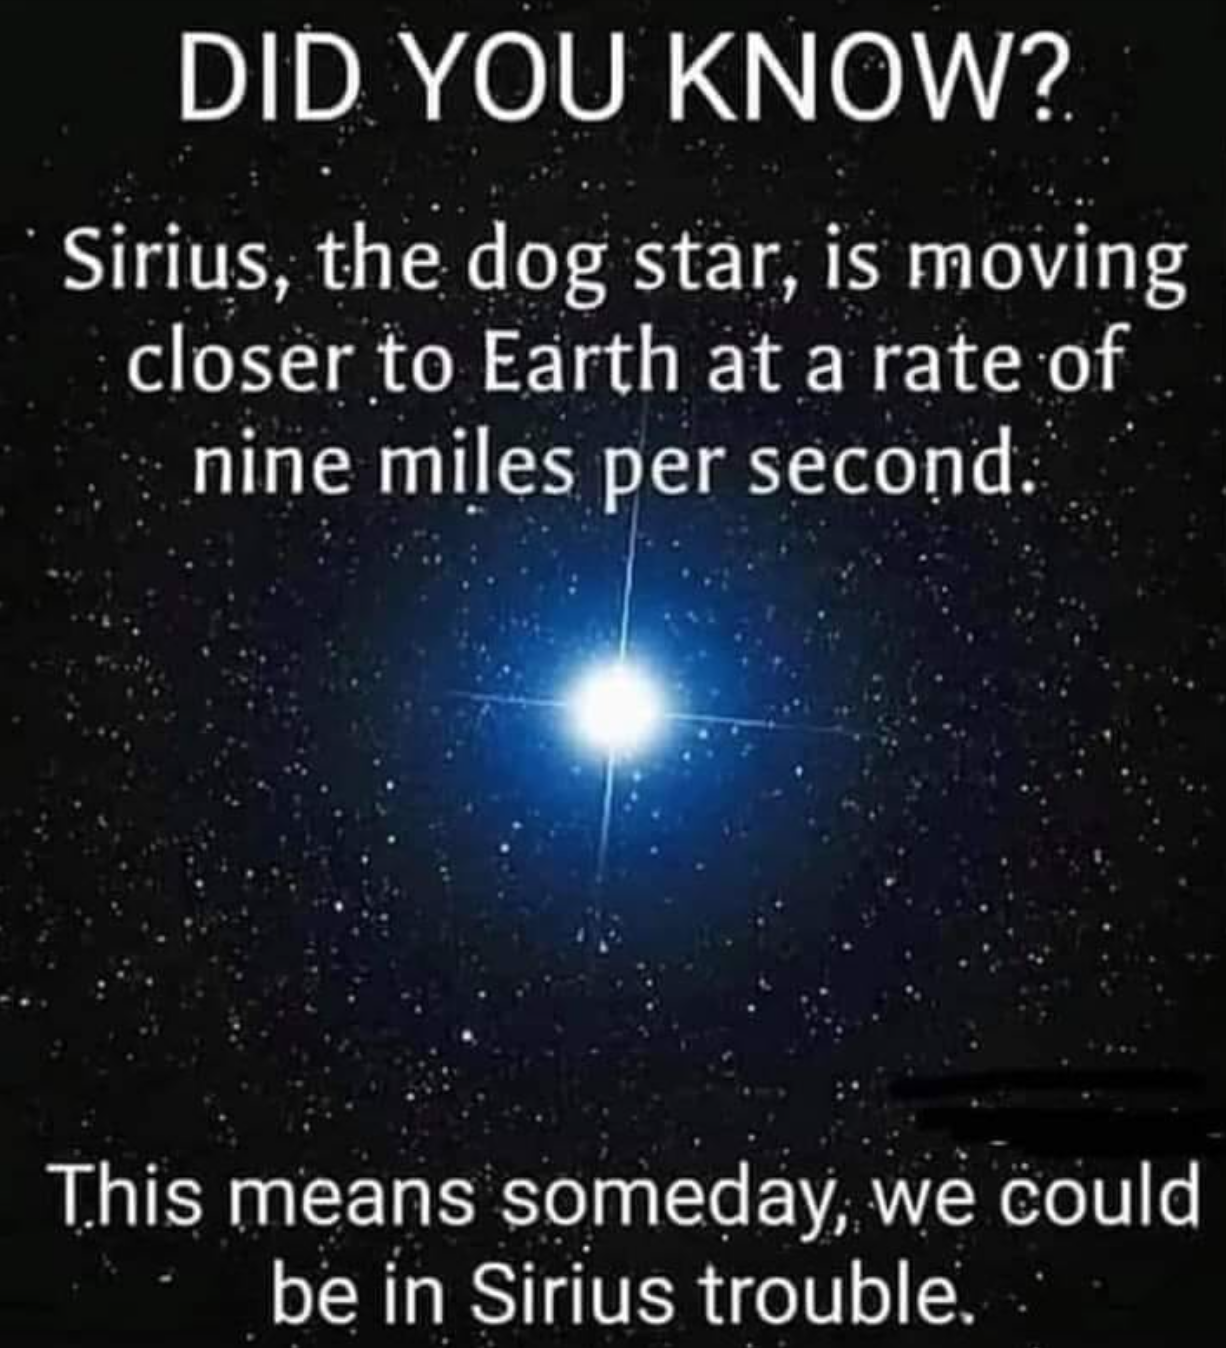 atmosphere - Did You Know? Sirius, the dog star, is moving closer to Earth at a rate of nine miles per second. This means someday, we could be in Sirius trouble.